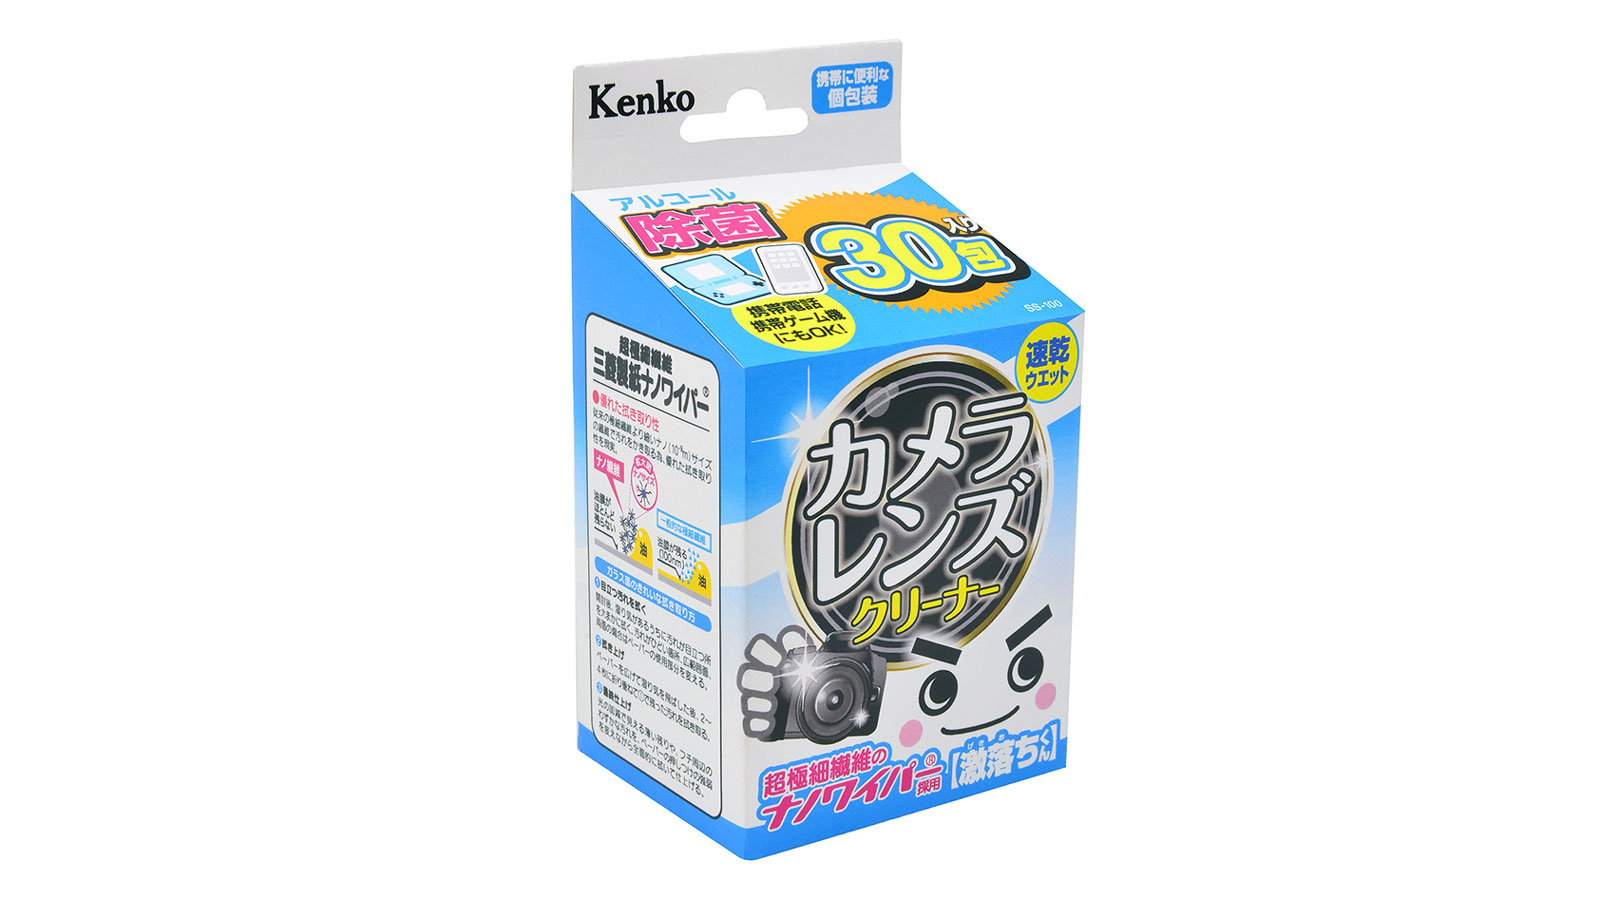 Each package of GEKIOCHI camera lens cleaner contains 30 wipes.